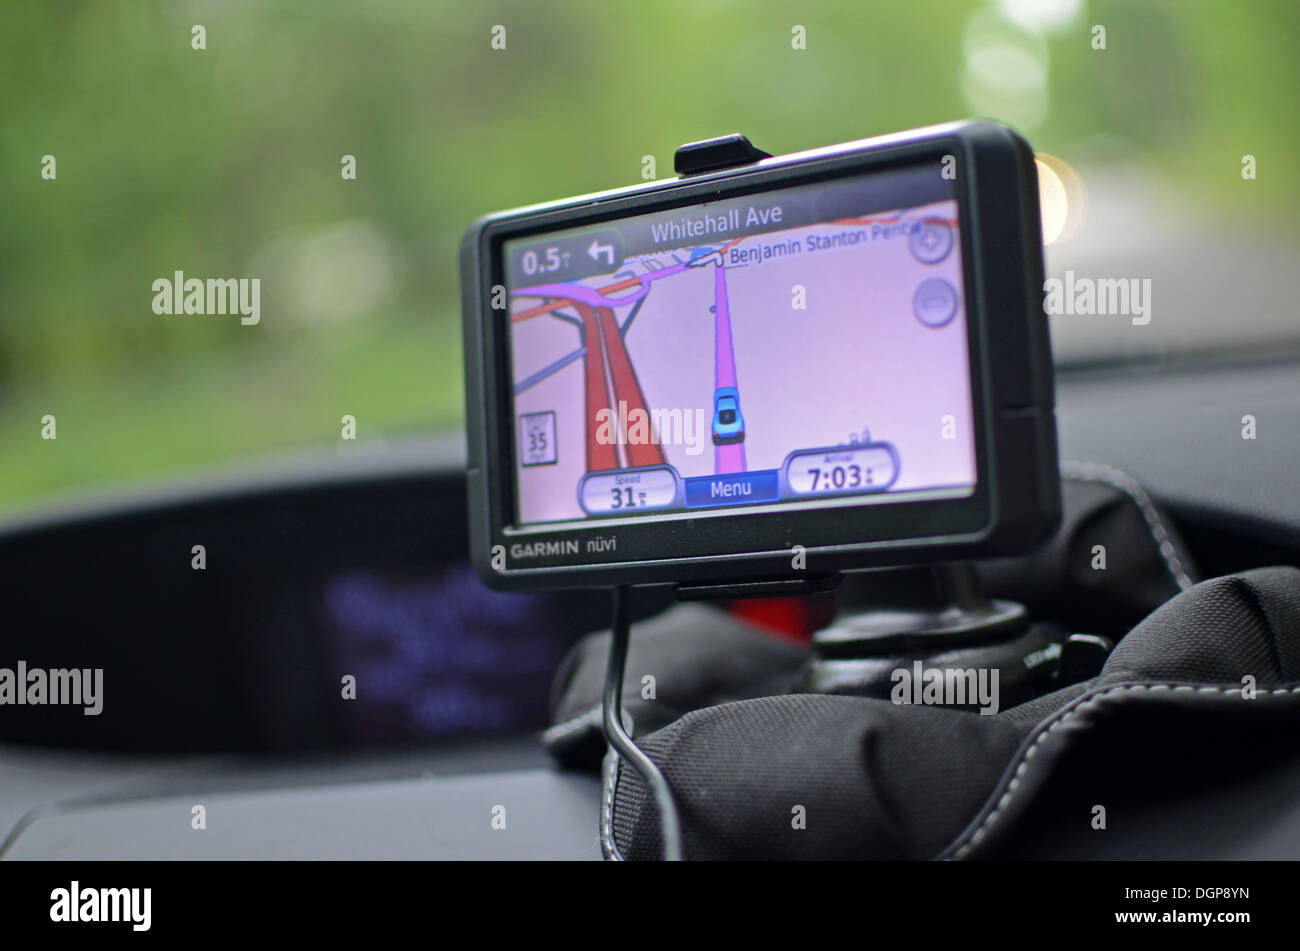 GPS device working inside a car Stock Photo